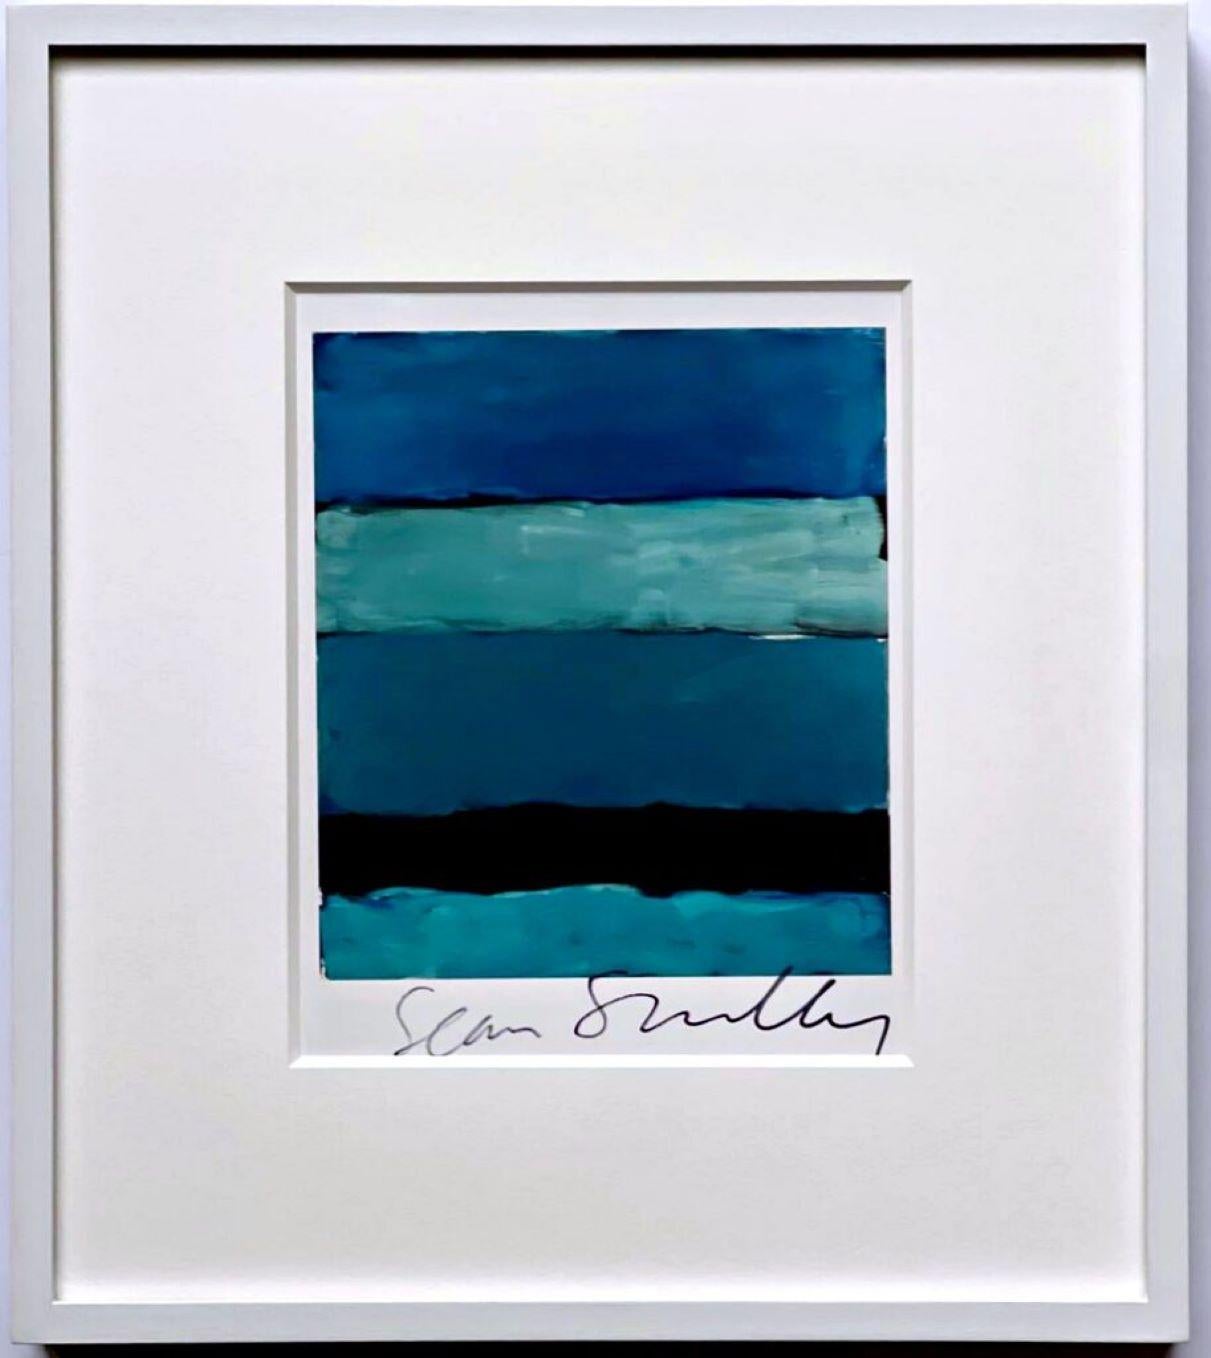 Sean Scully
Landline (hand signed by Sean Scully), 2015
Offset lithograph card (hand signed)
Signed in black felt tip pen on the front
Frame included

Offset lithograph card published by Cheim and Read Gallery on the occasion of their 2015